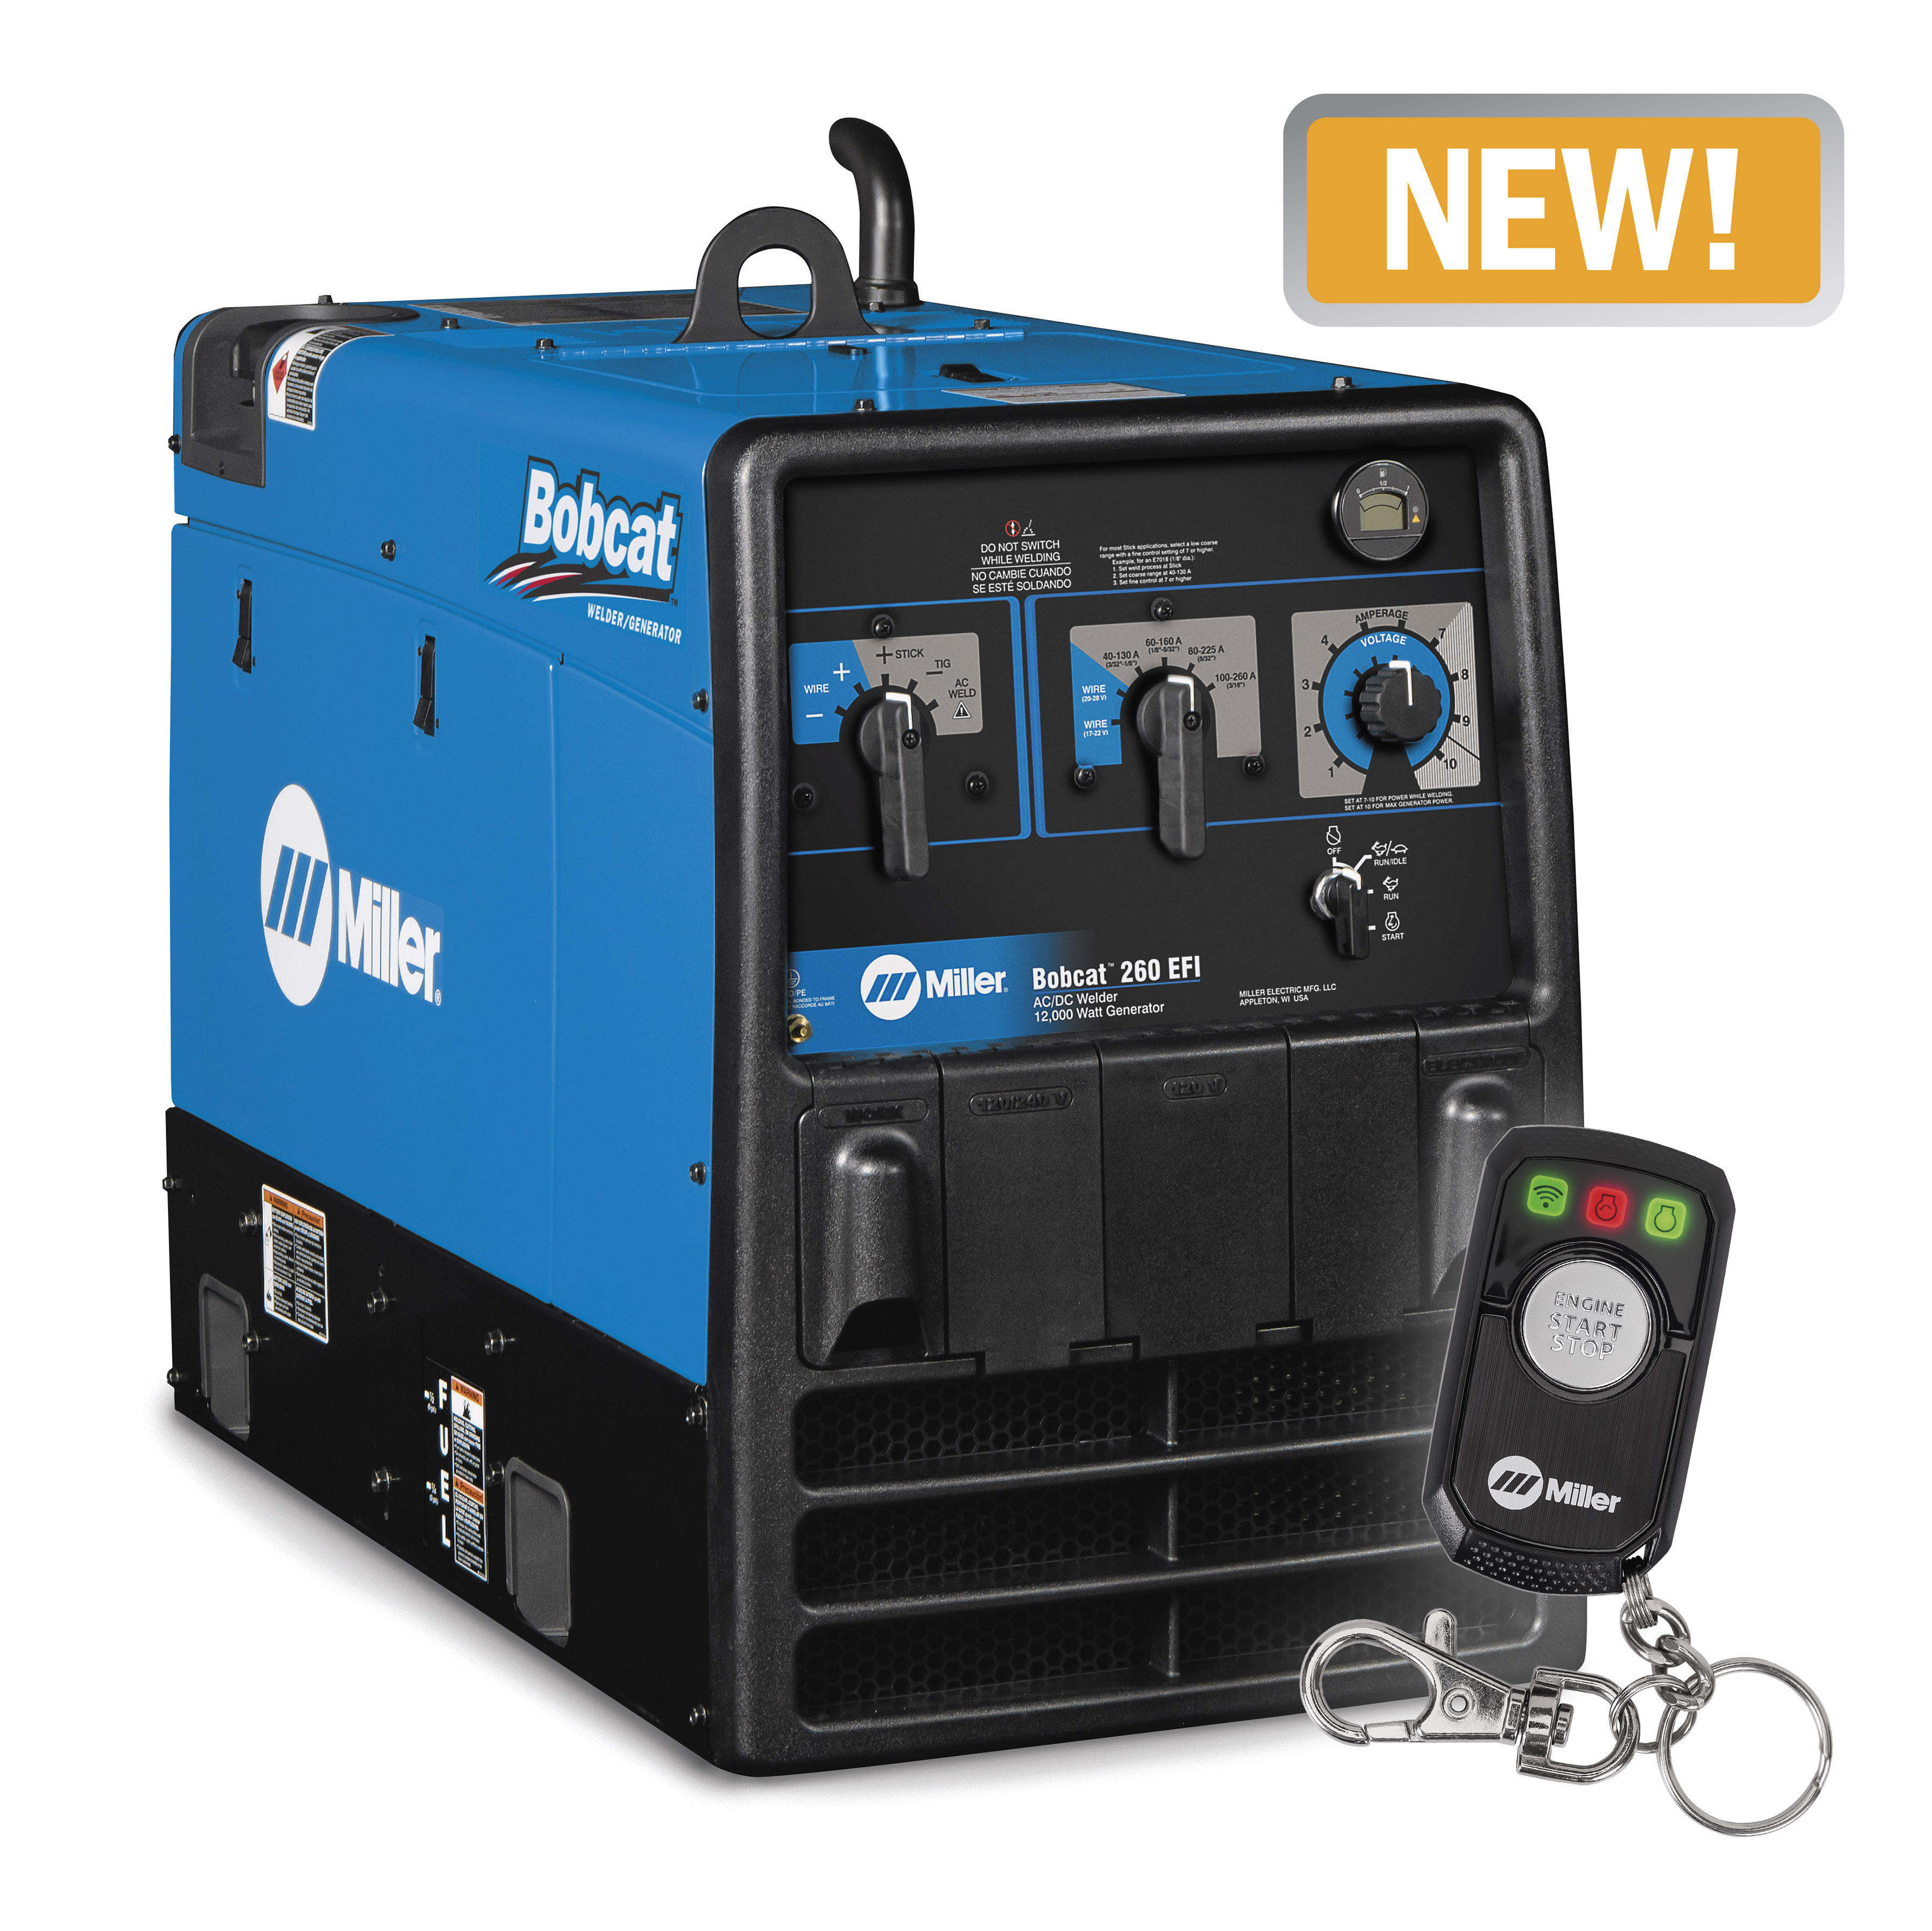 Bobcat™ 260 EFI with Remote Start/Stop